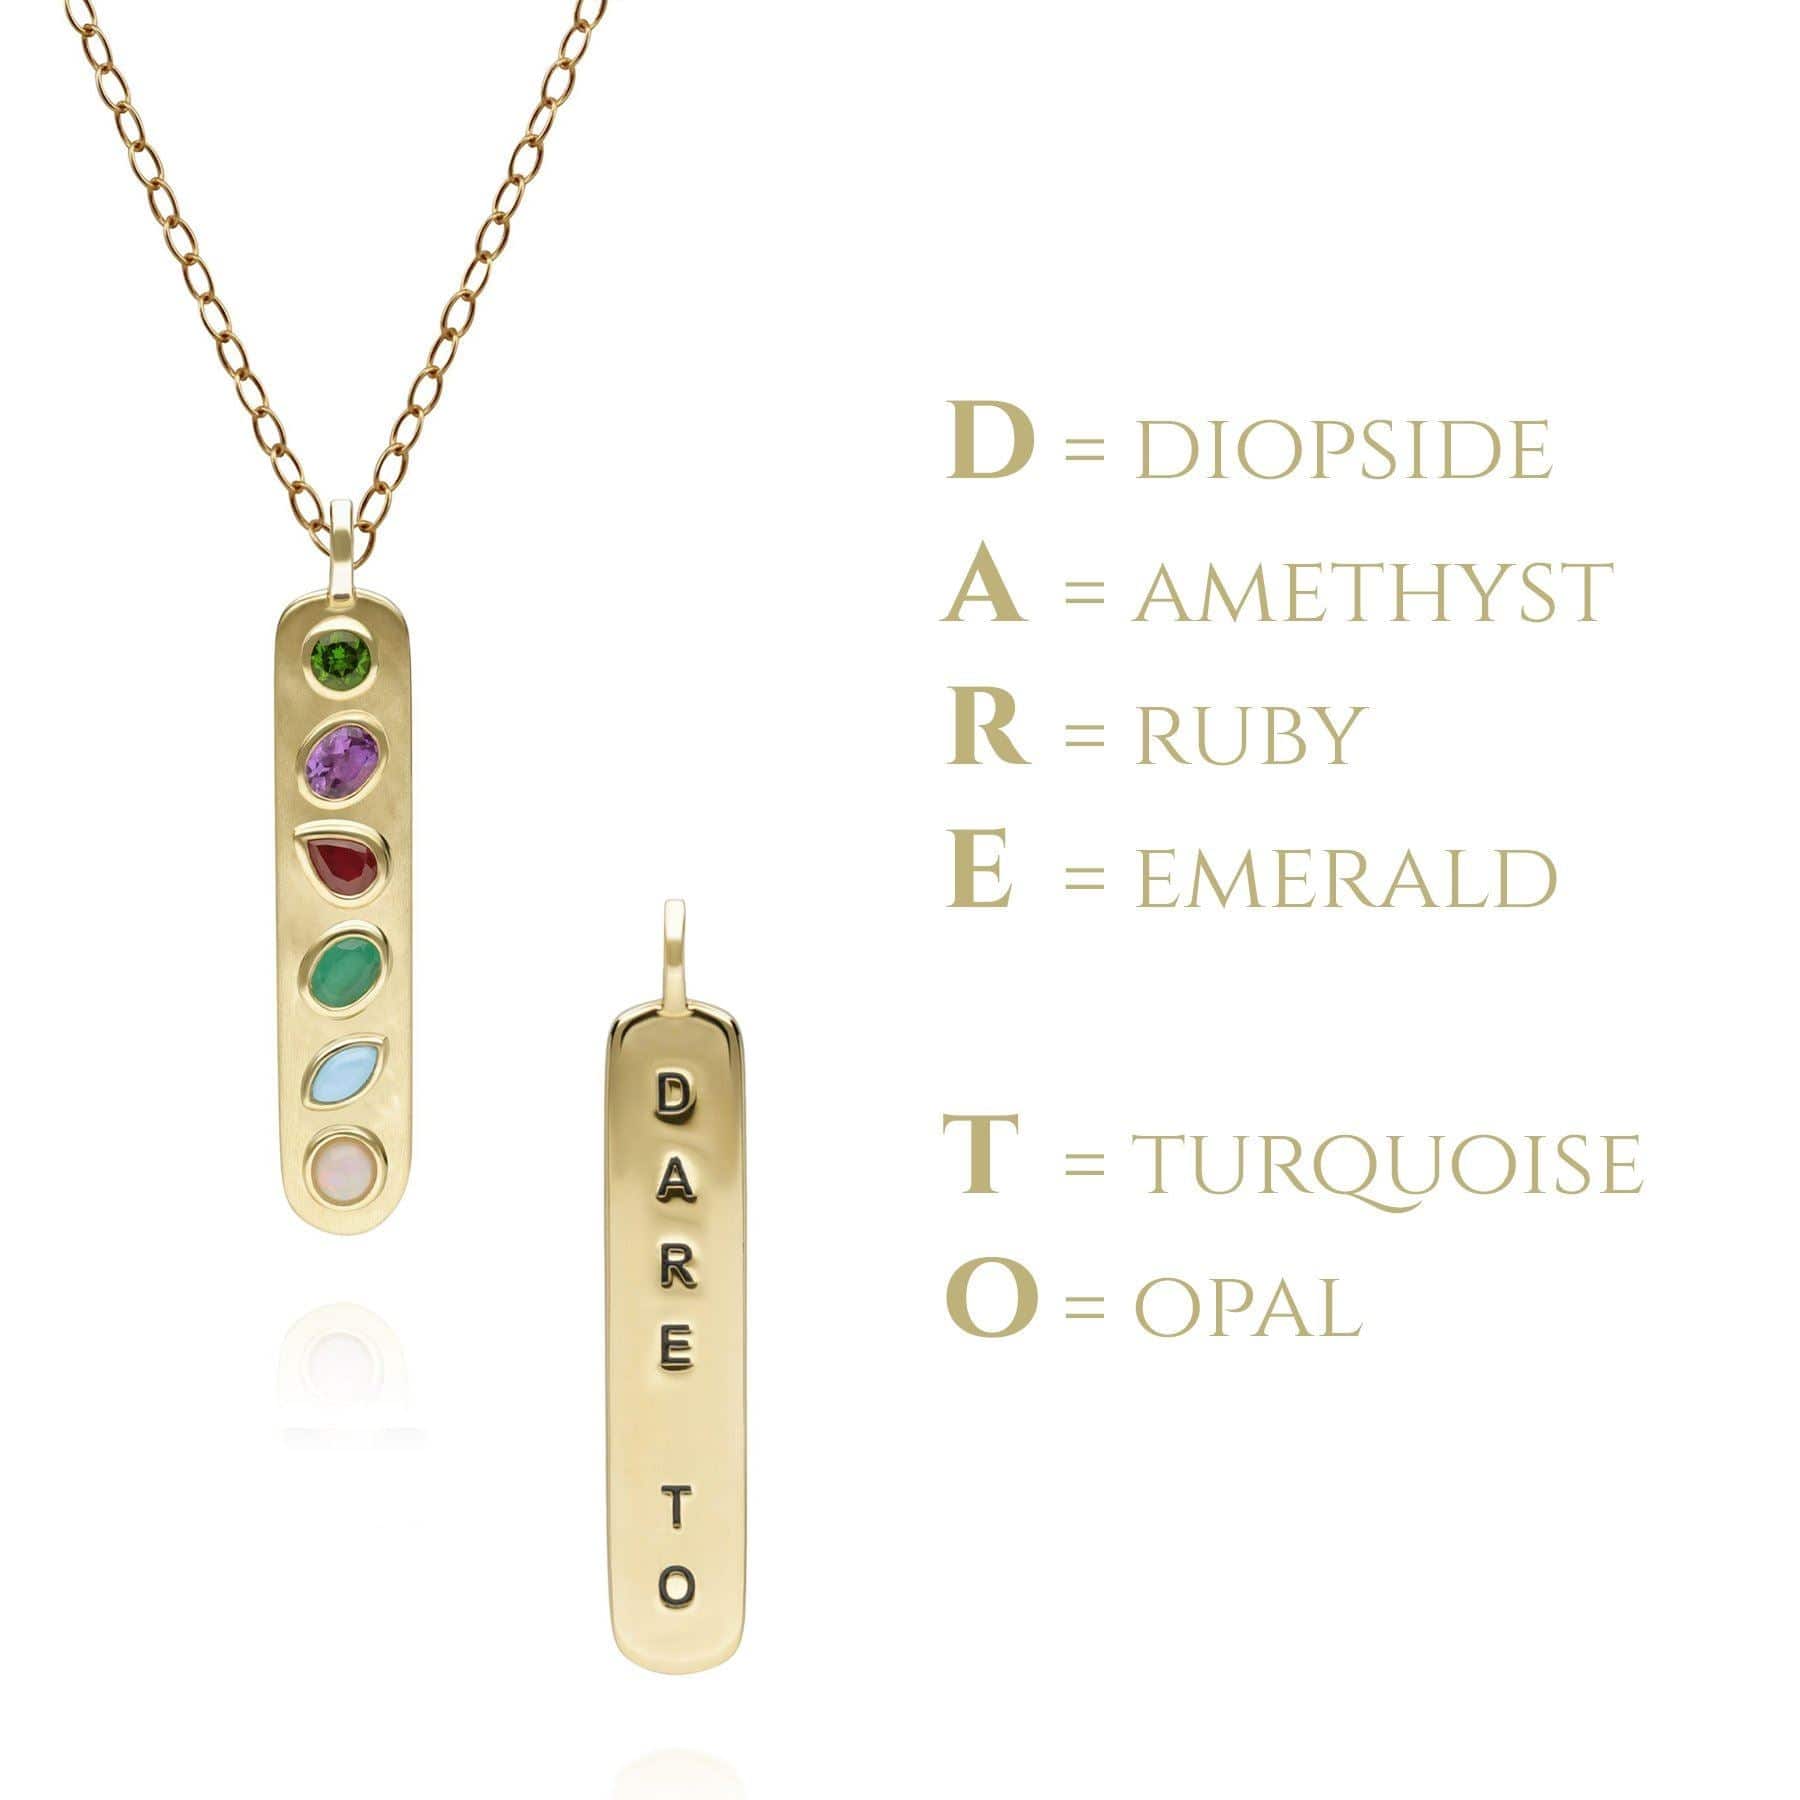 Coded Whispers 'Dare To' Acrostic Gemstone Pendant Necklace in Sterling Silver - Gemondo